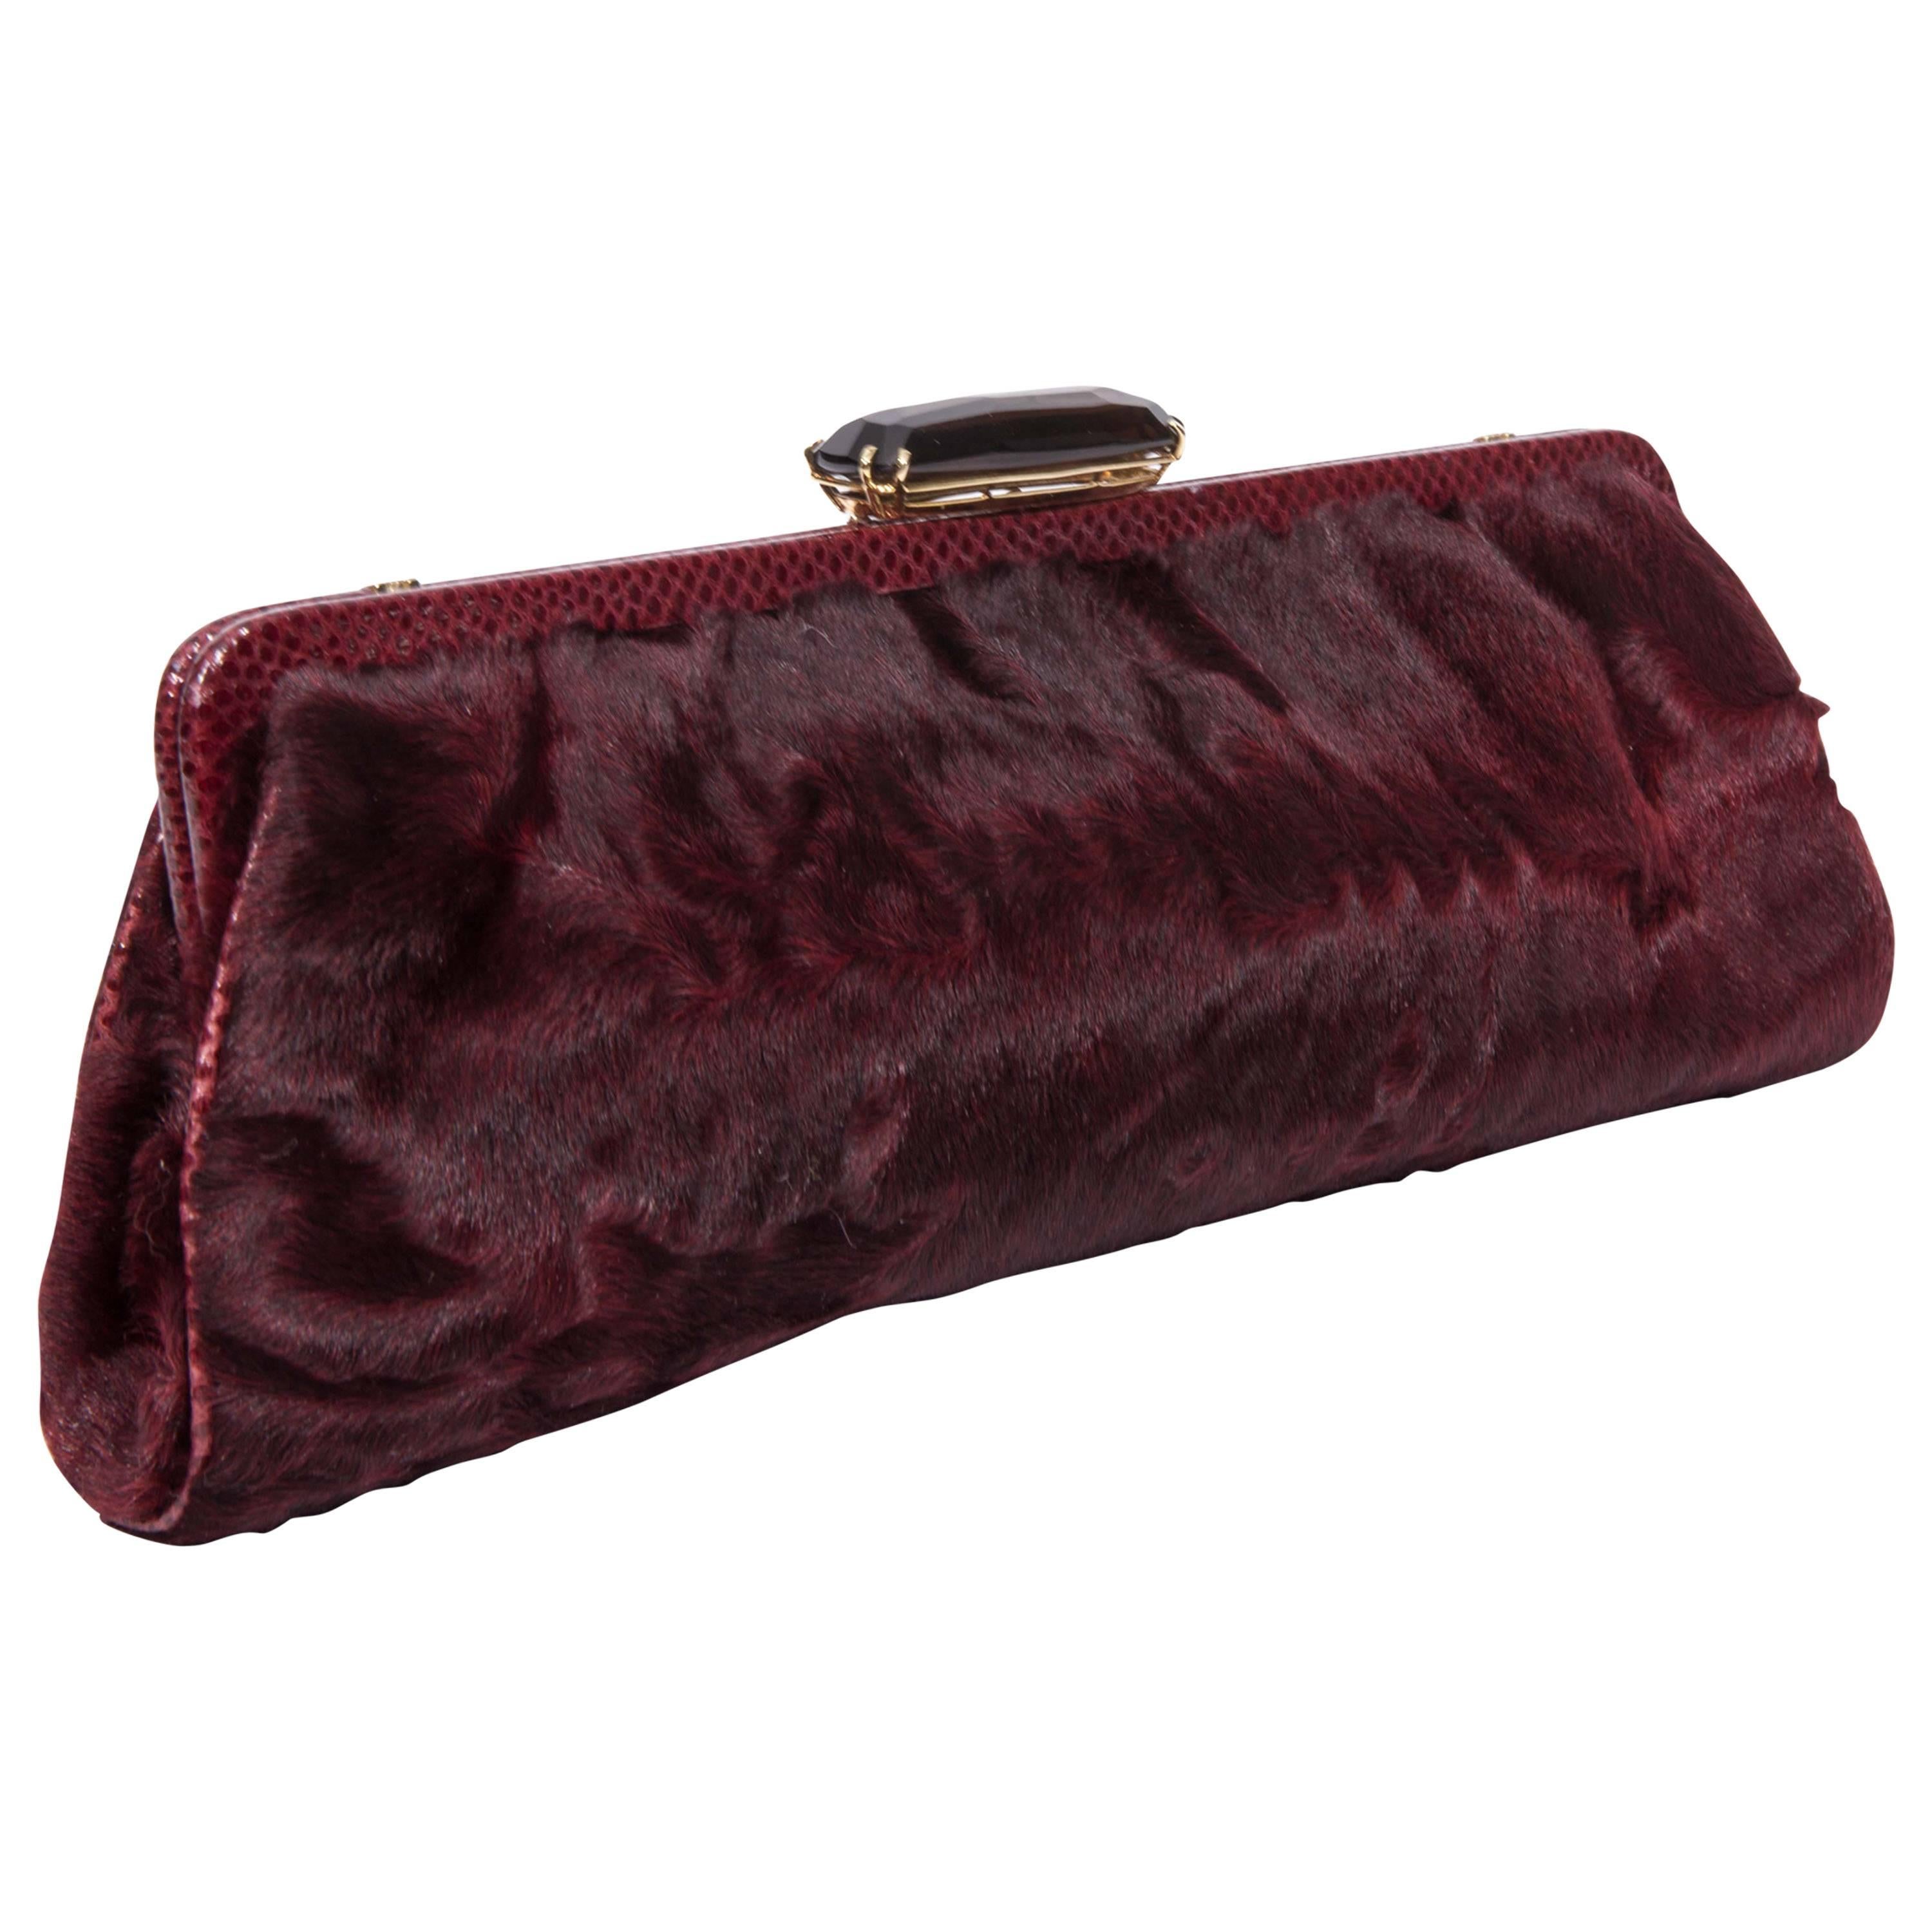 Dennis Basso Wine Colored Fur Clutch with Snake Trim and Crystal Clasp